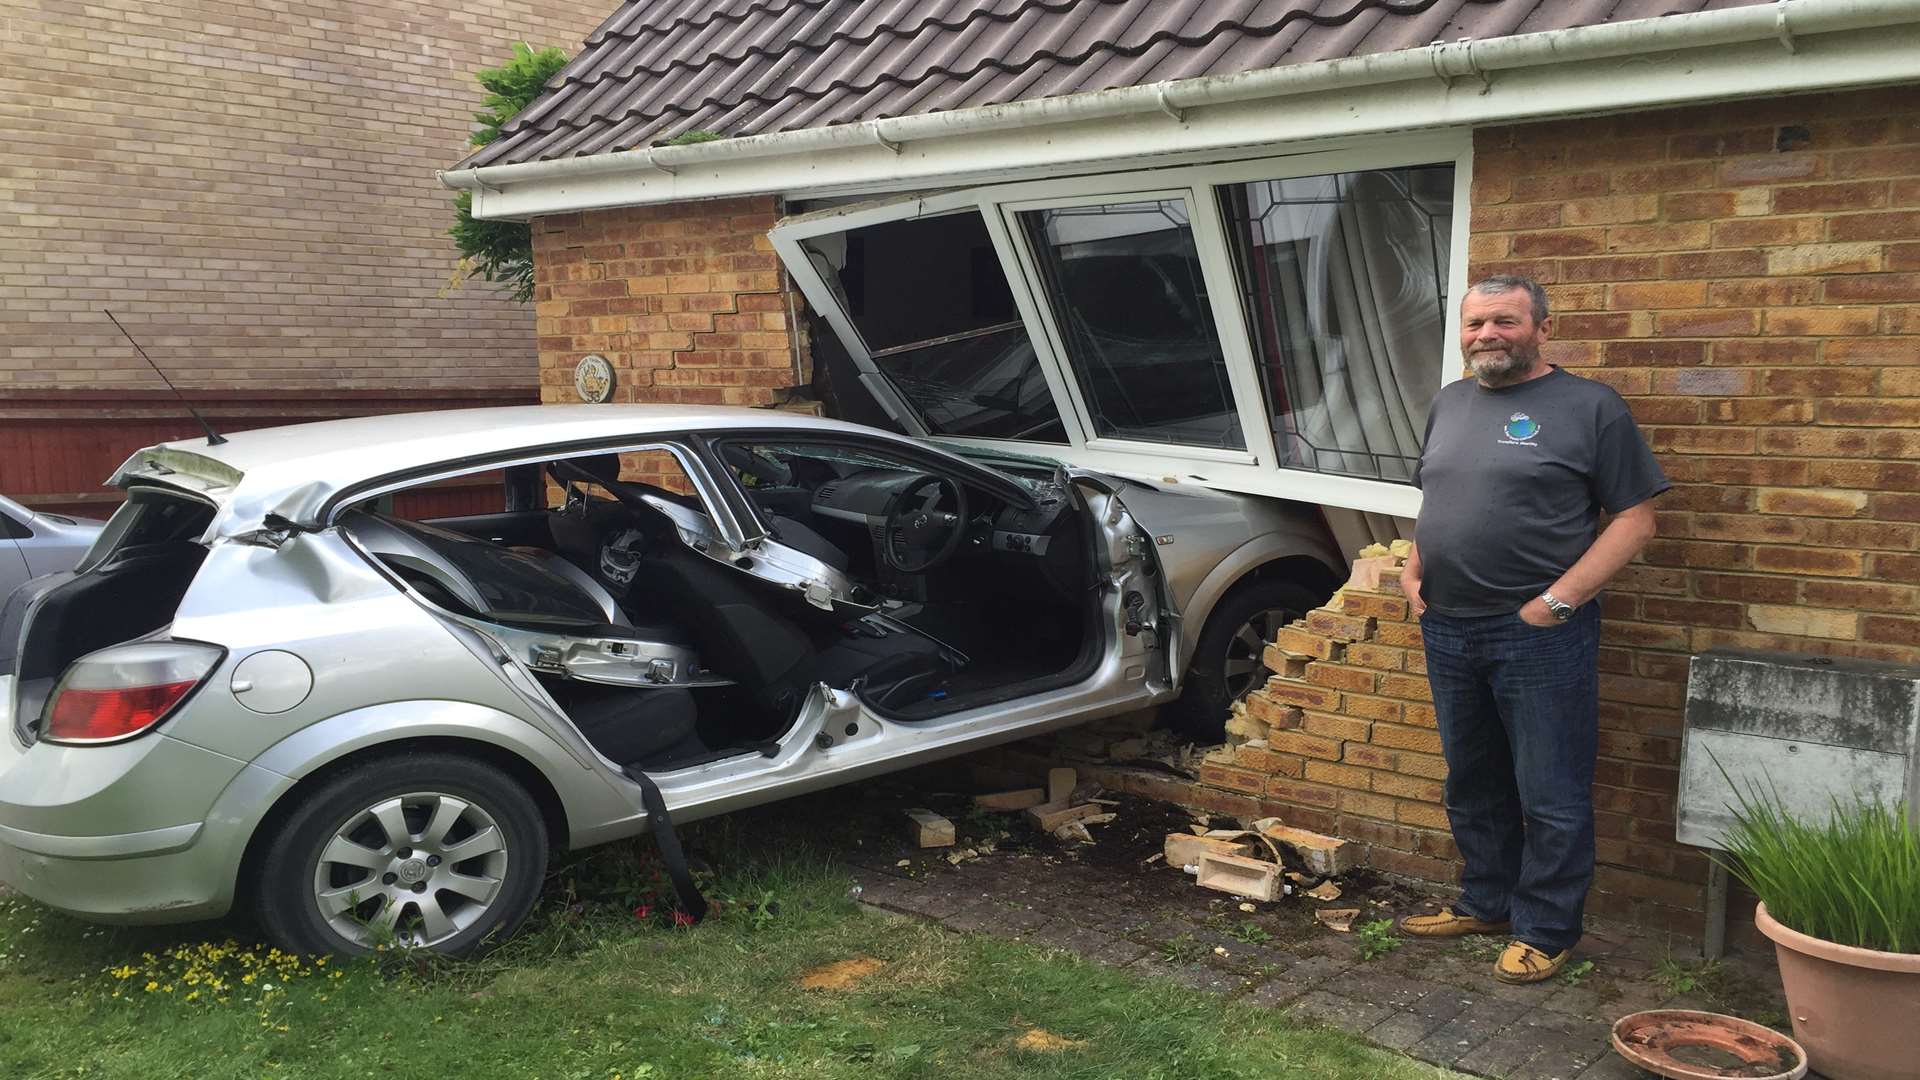 Pensioner Alan Kemp beside the car that ploughed through his living room window last night